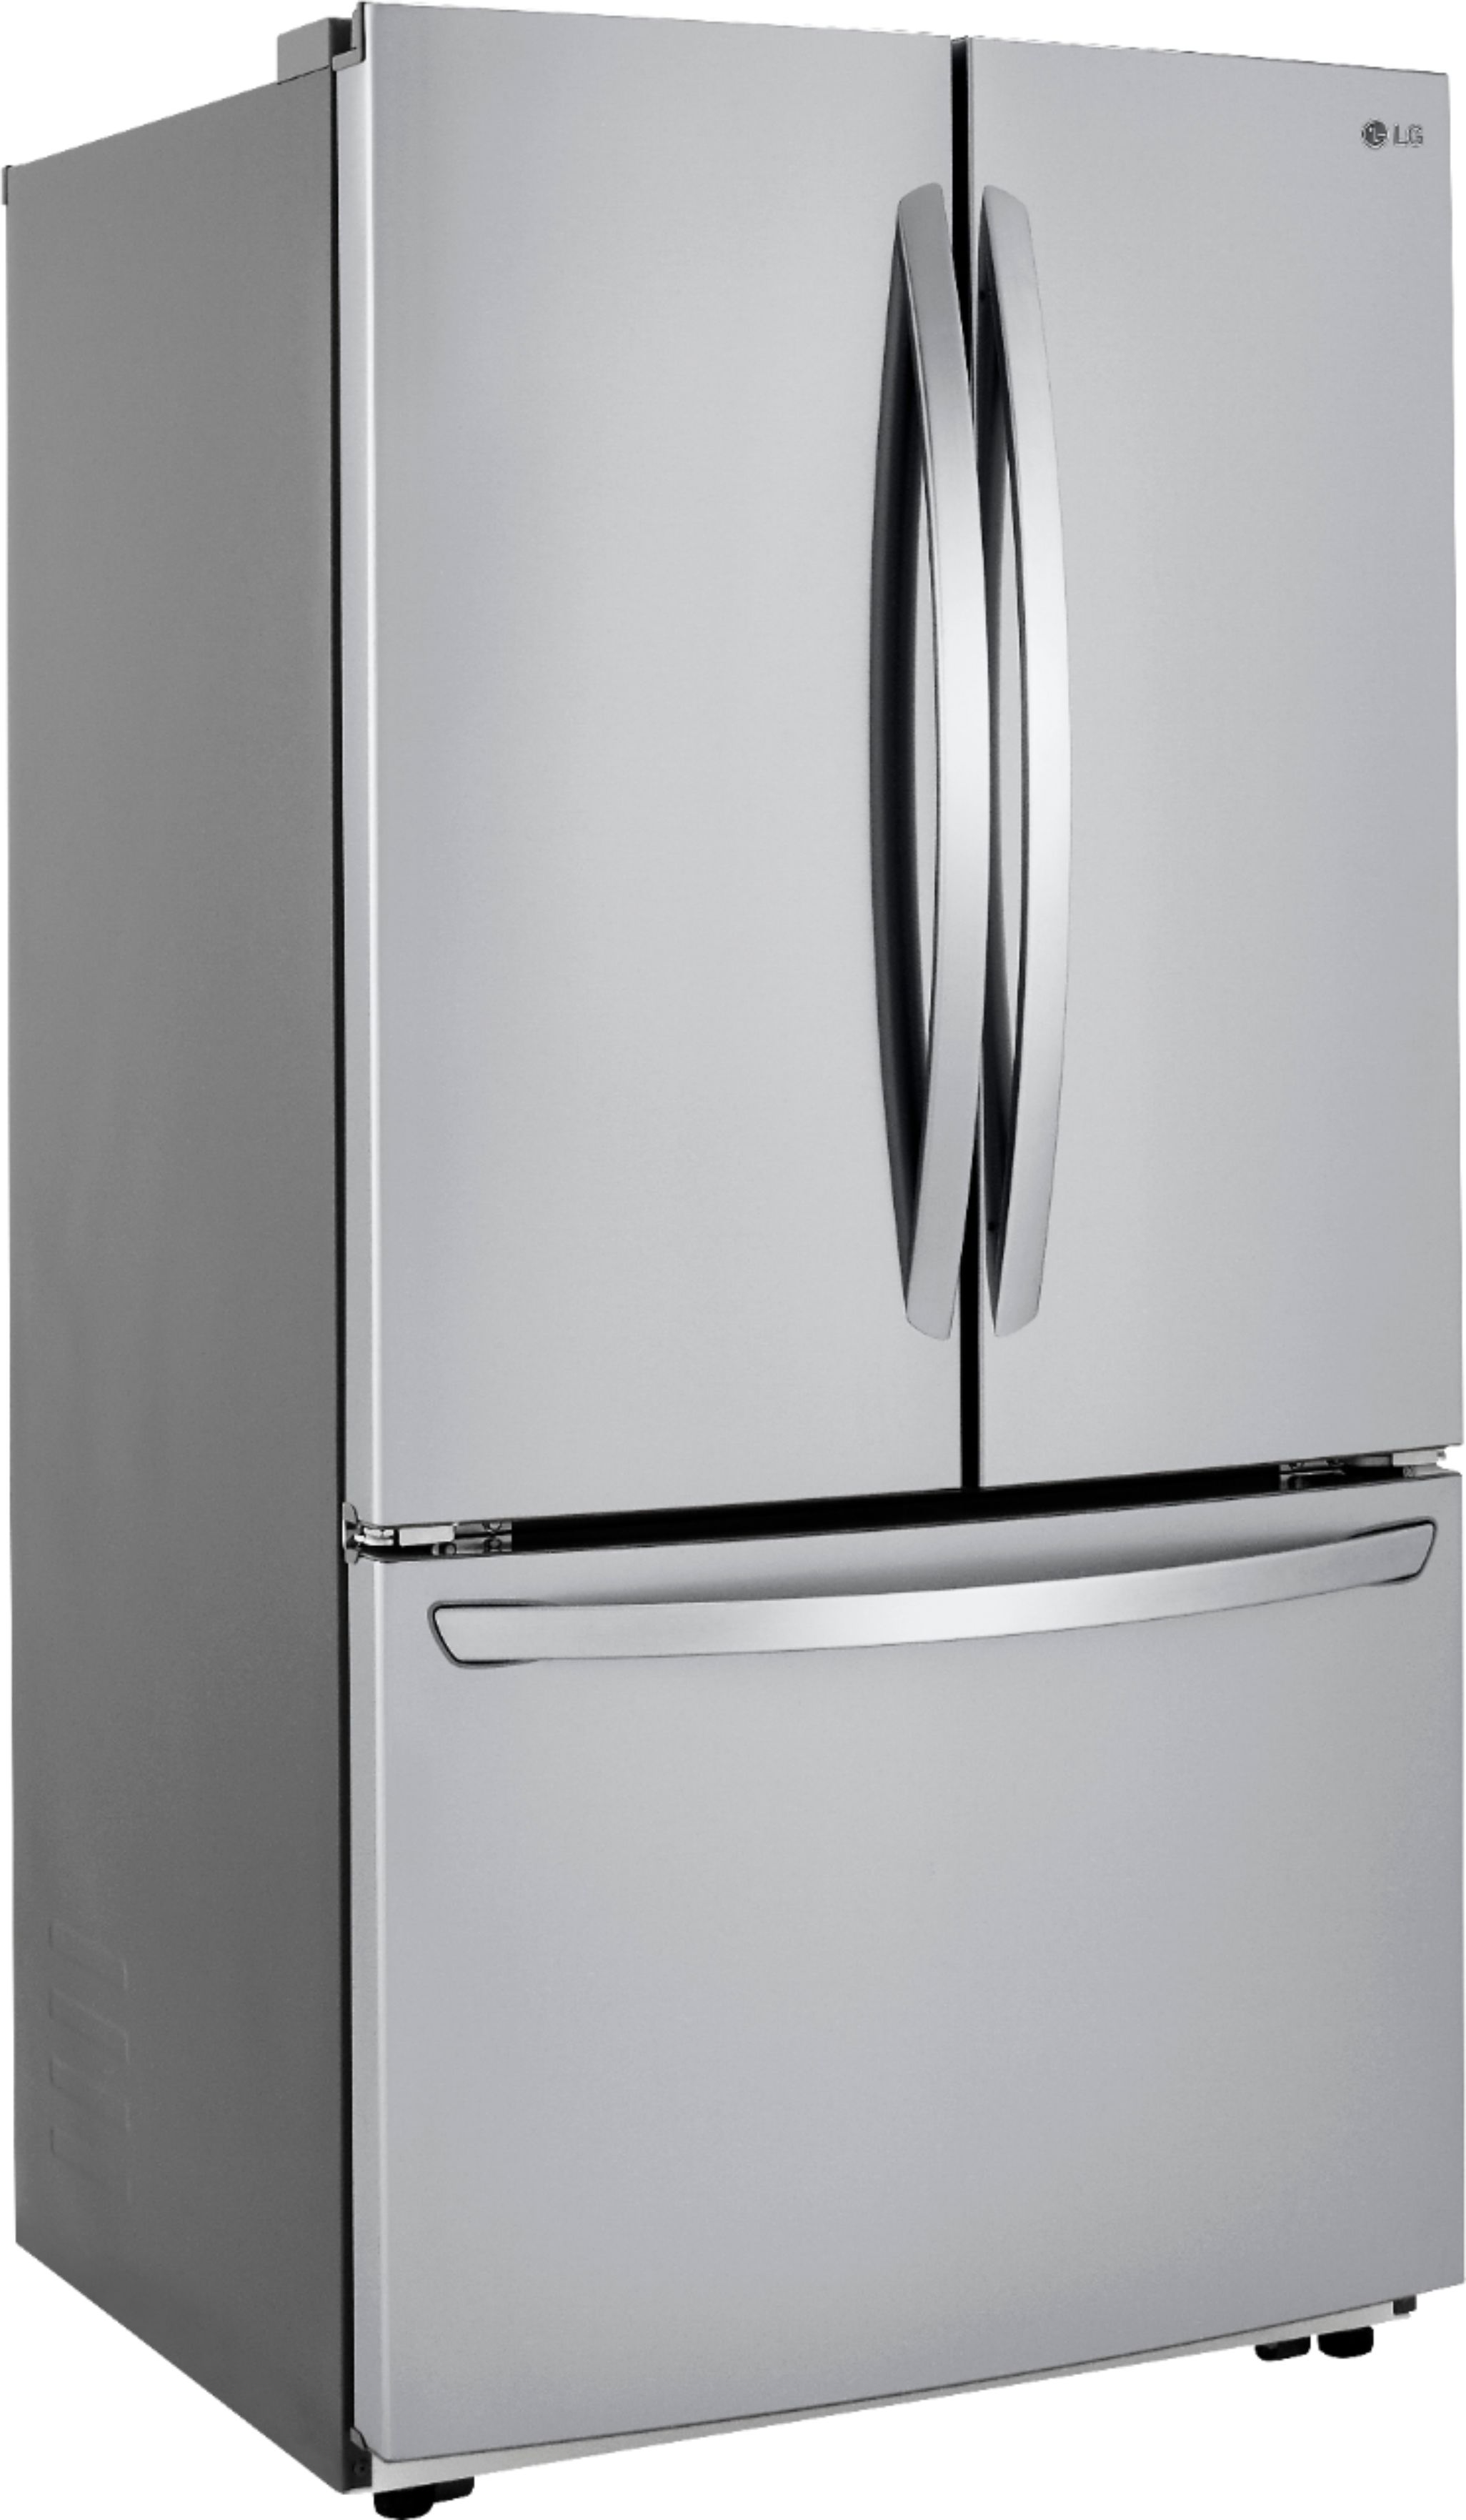 Angle View: LG - 22.8 Cu. Ft. French Door Counter-Depth Refrigerator - Stainless steel